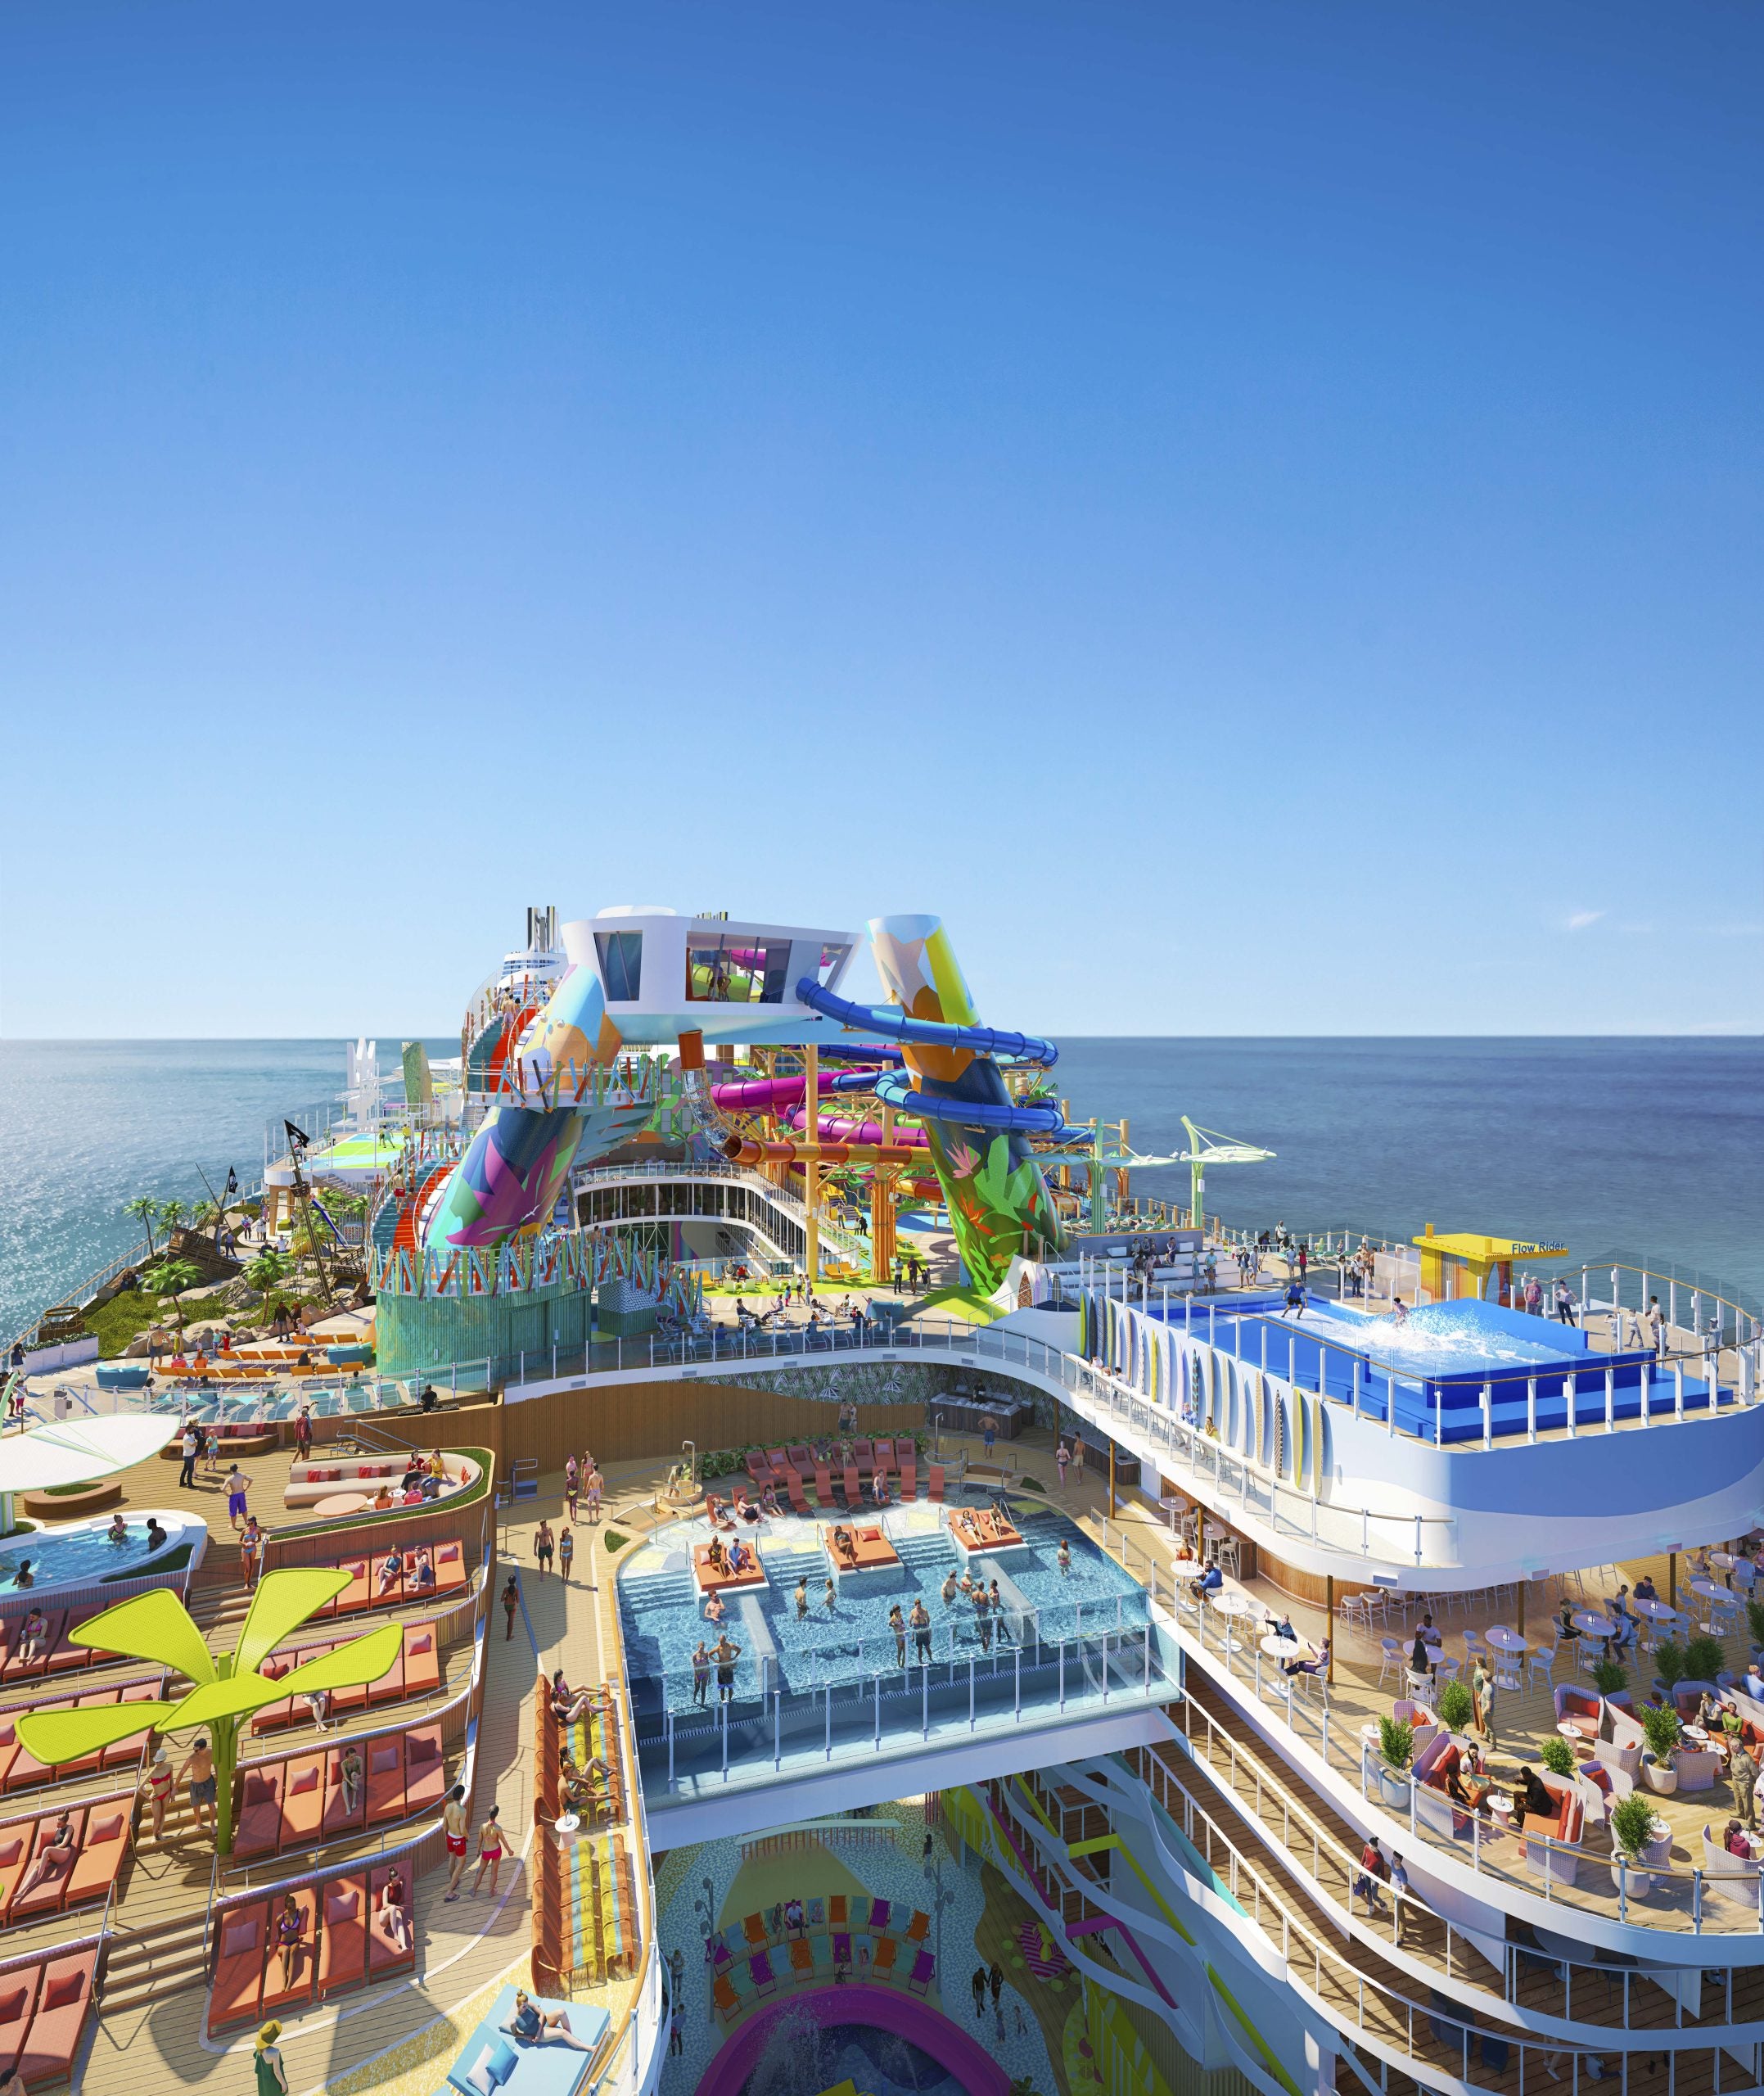 We Were Onboard The Newest, Biggest Cruise Ship In The World – Royal Caribbean’s Icon Of The Seas